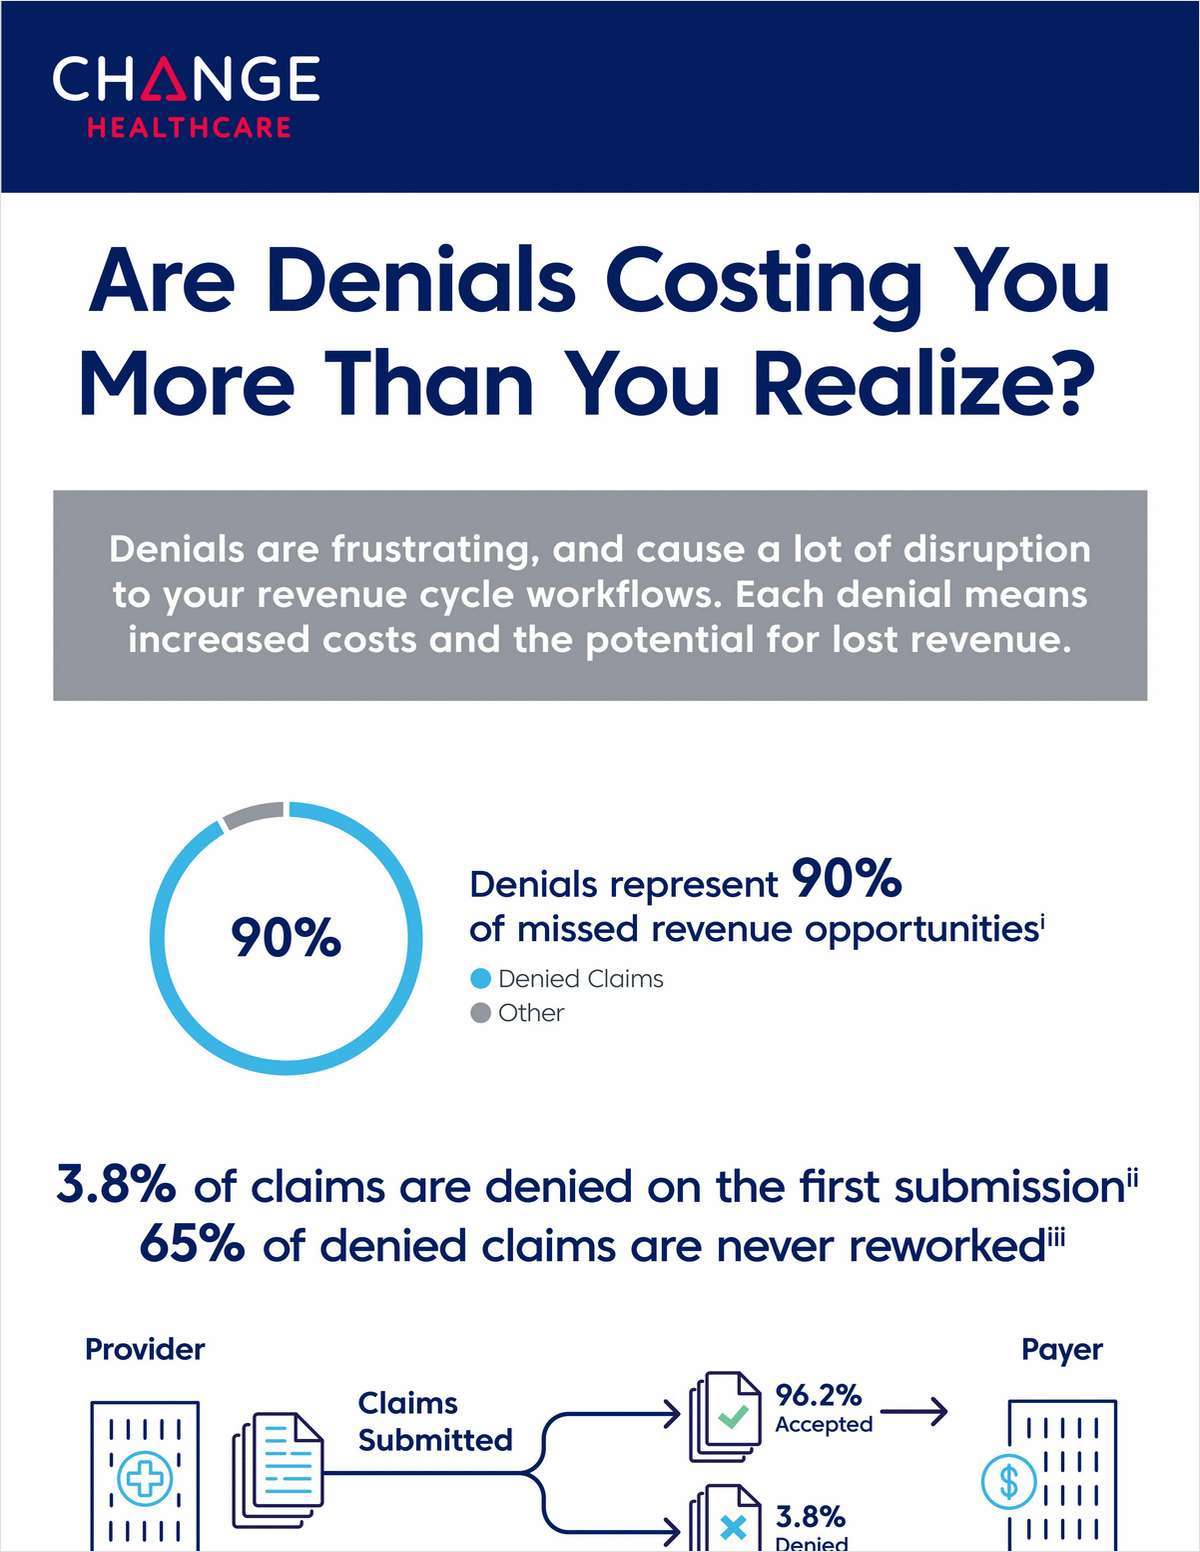 Are Denials Costing You More Than You Realize?